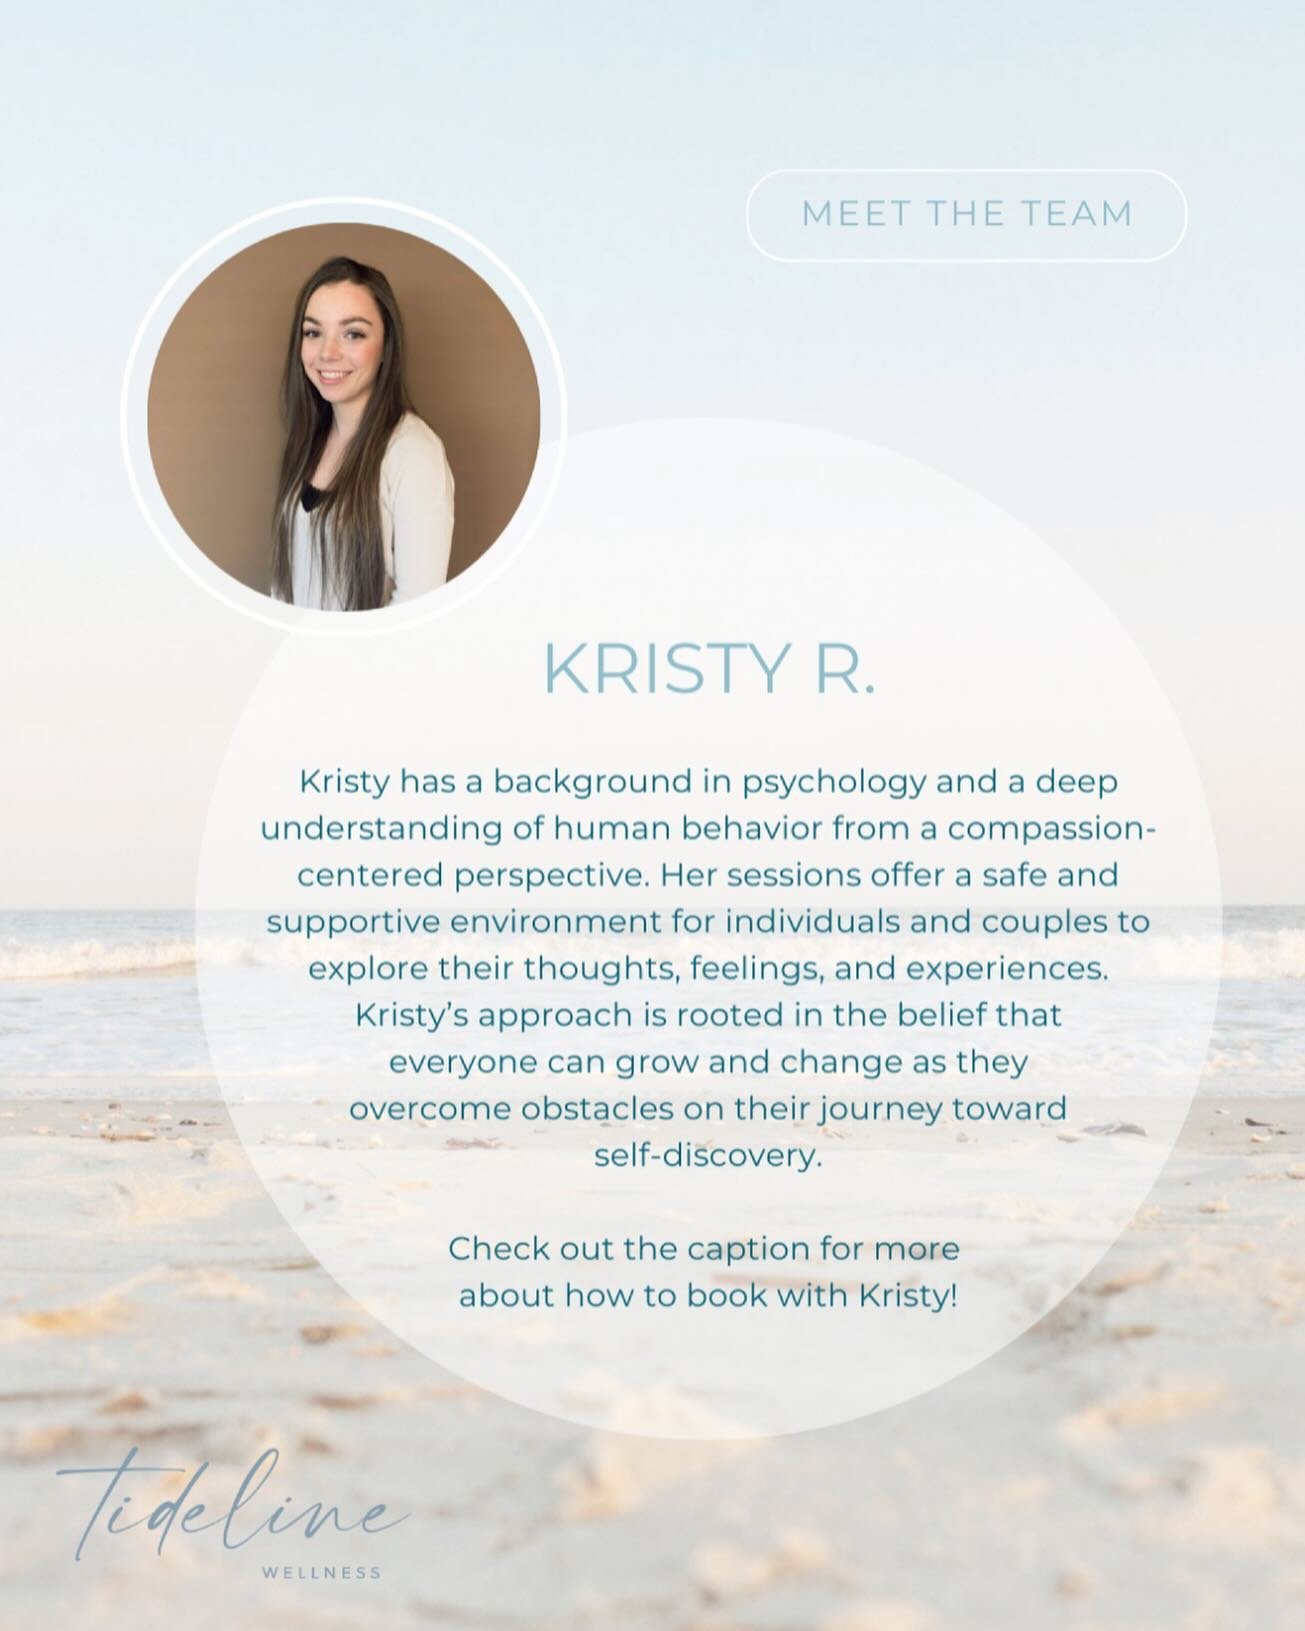 Meet Kristy! As a Registered Clinical Counsellor, she is passionate about helping individuals navigate the challenges of life and achieve their full potential 💓

Kristy has a strong background in psychology and a deep understanding of human behavior